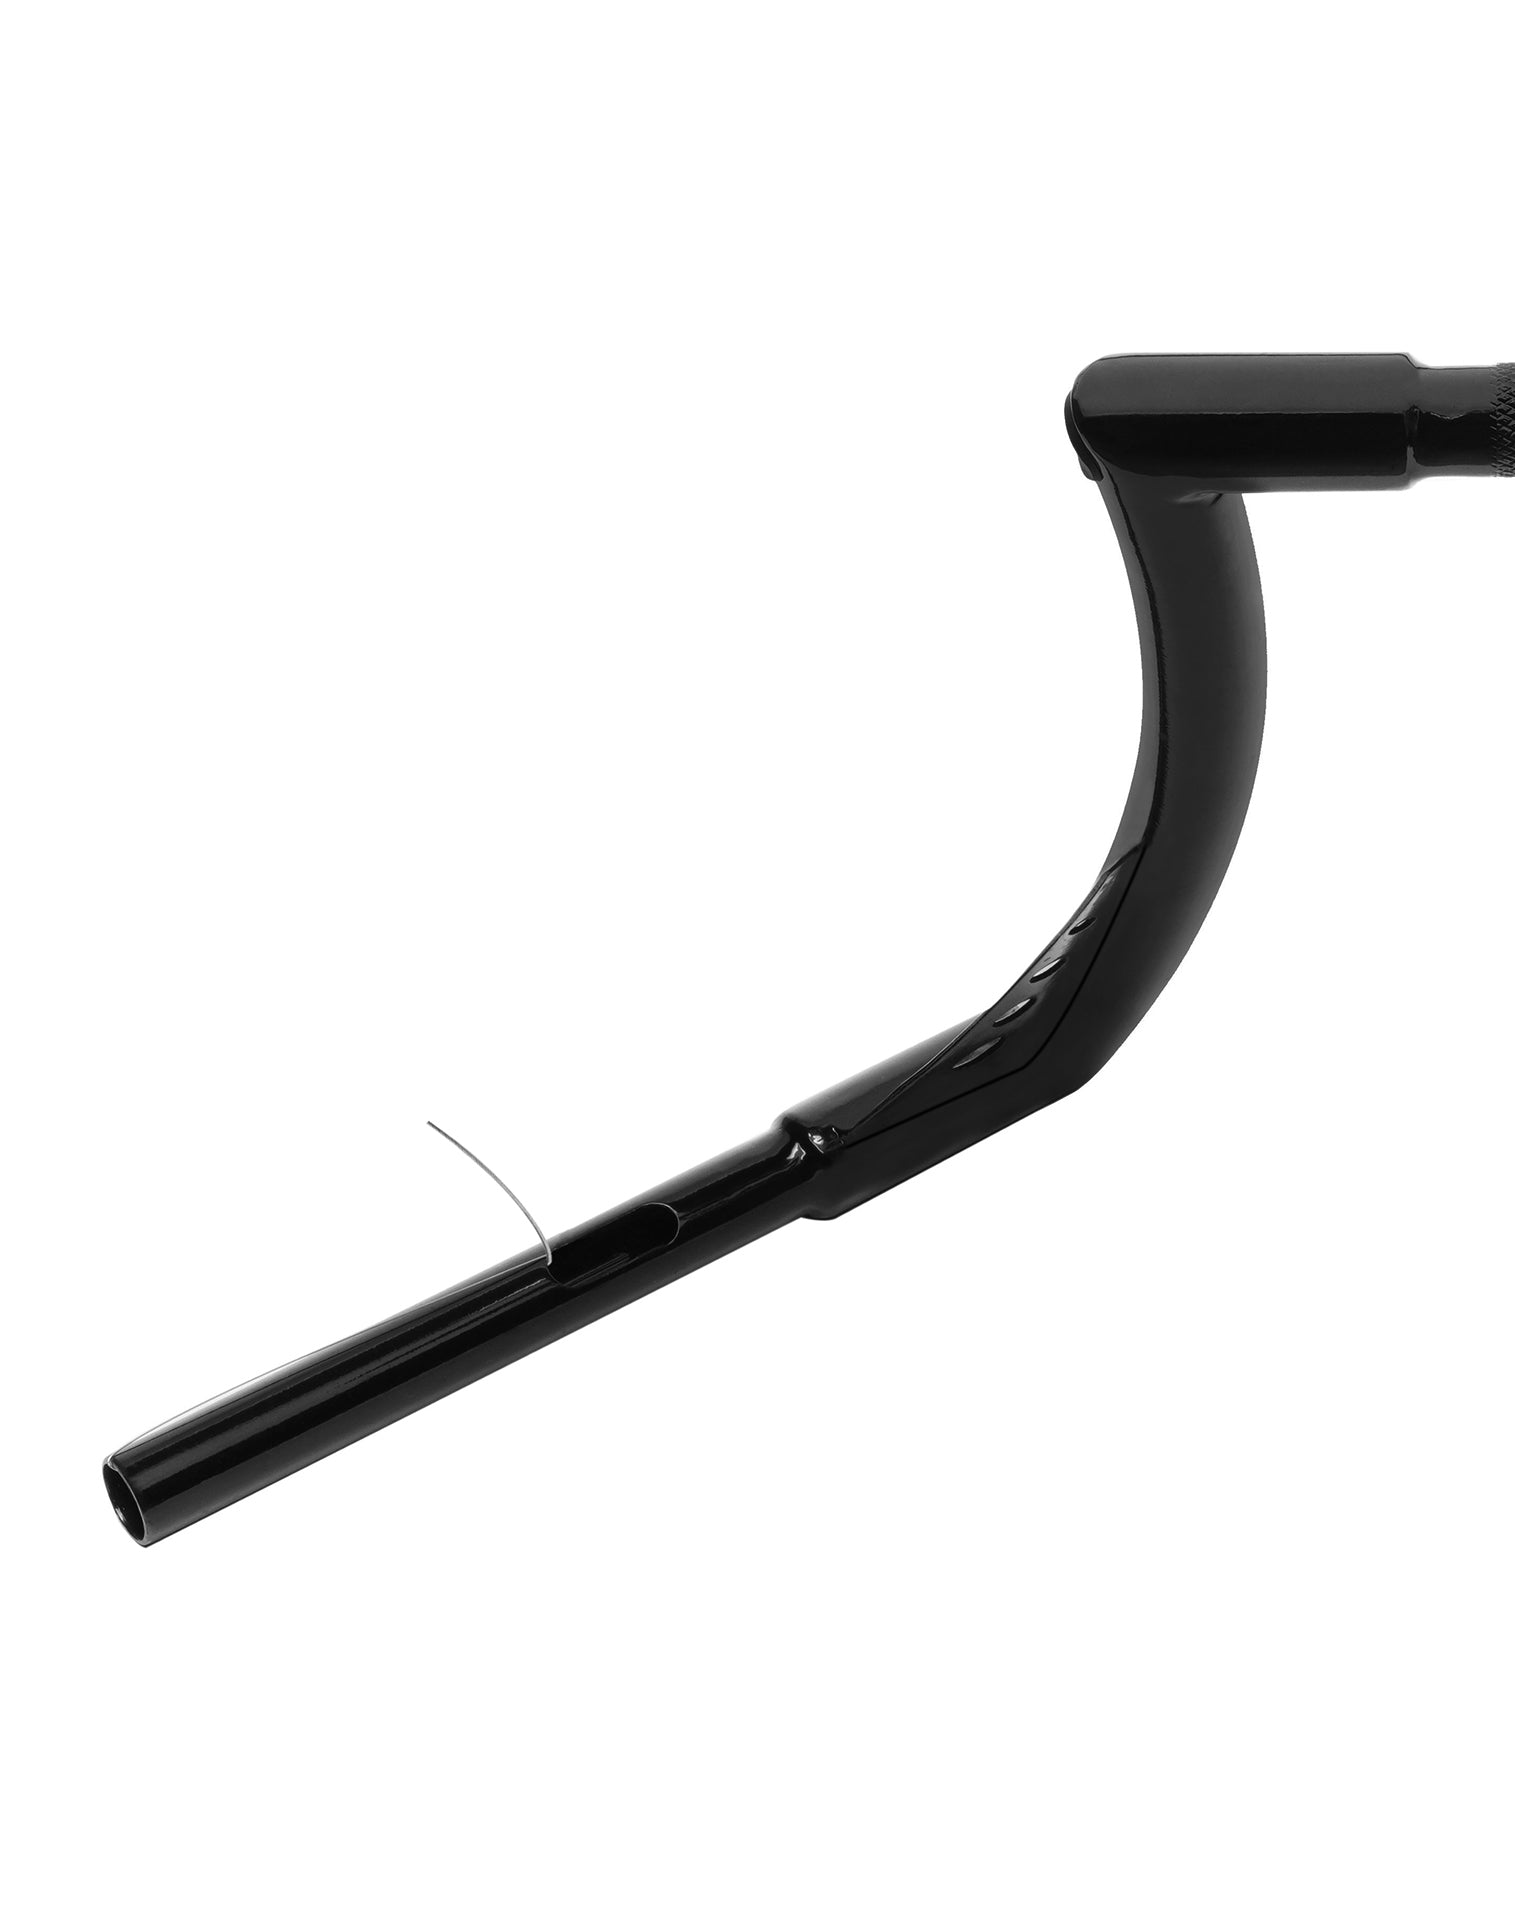 Viking Iron Born 12" Handlebar For Harley Dyna Wide Glide FXDWG Gloss Black Close Up View